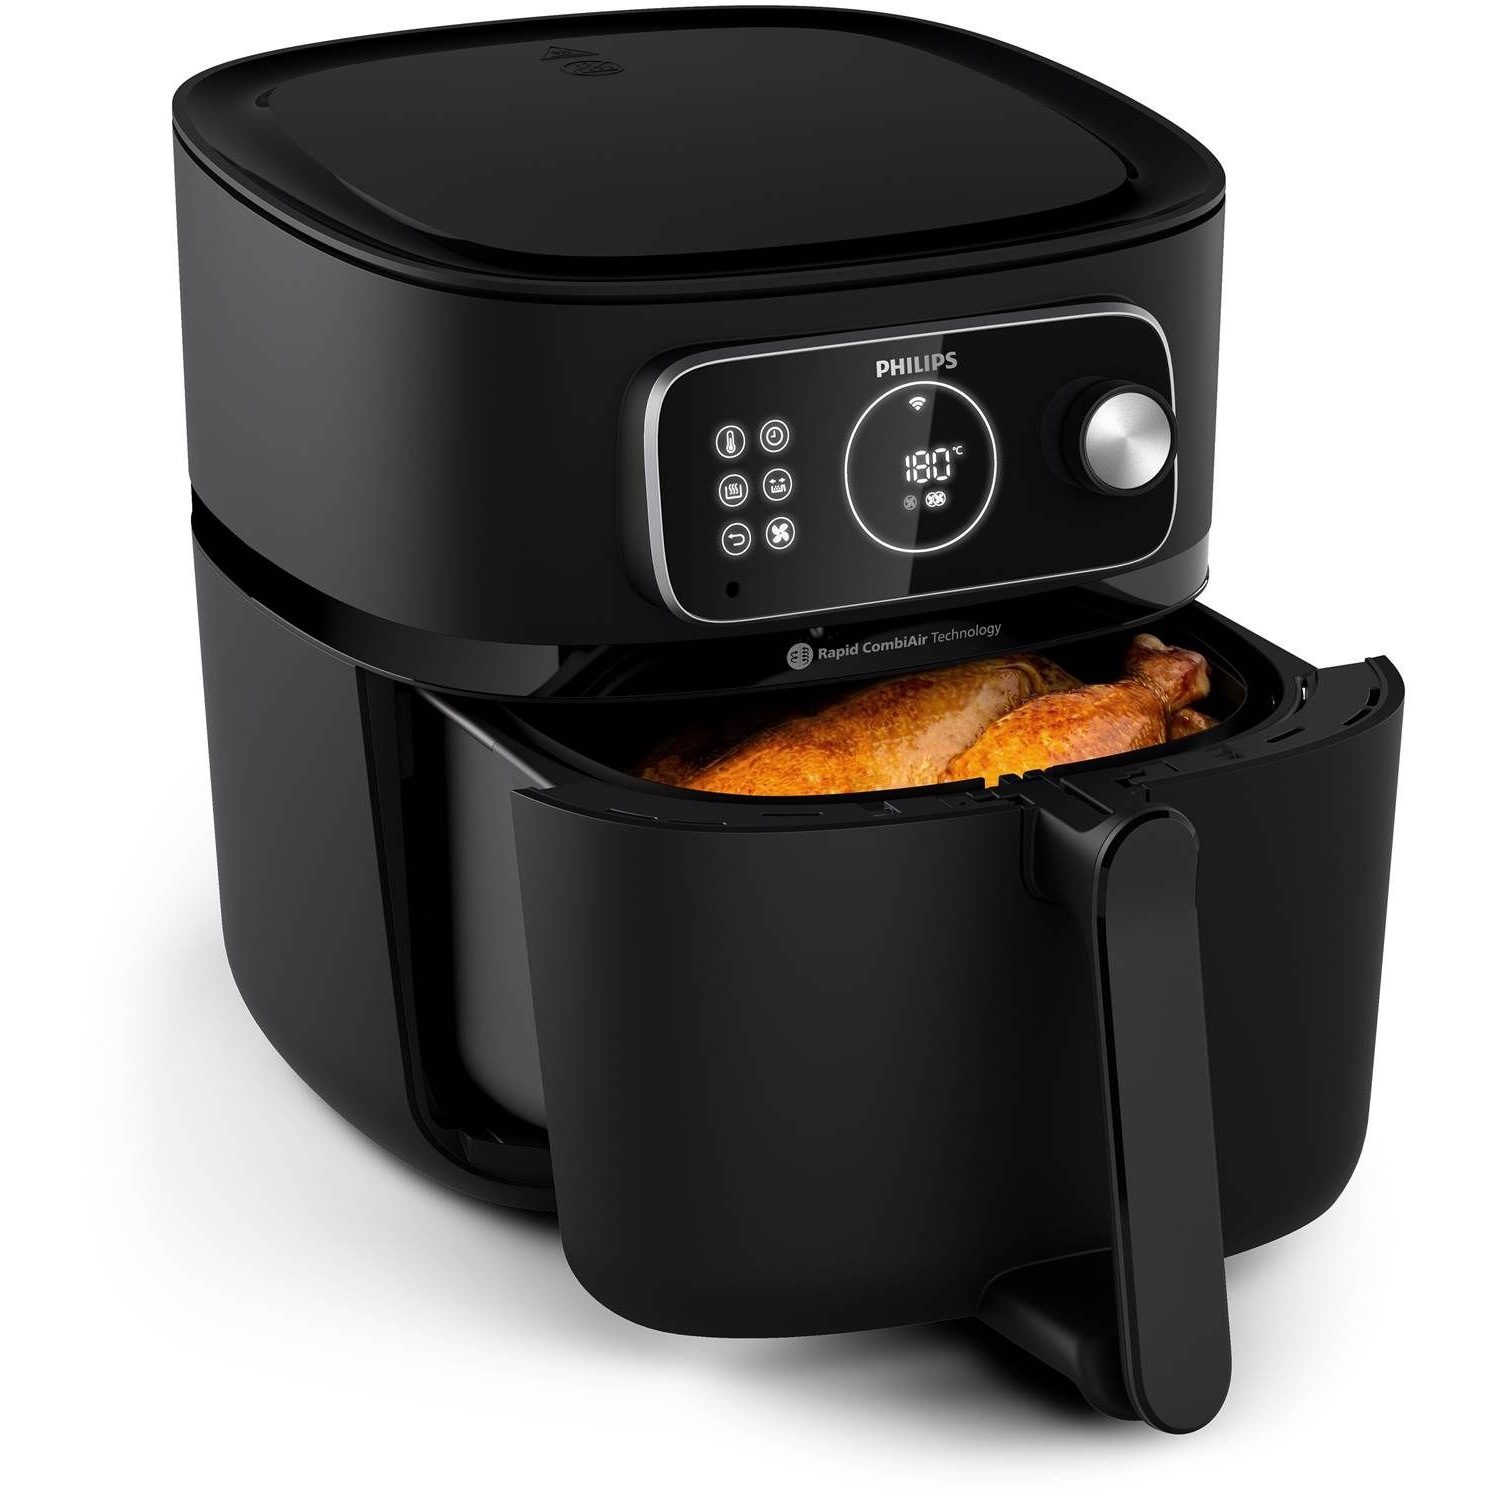 8720389036057 Philips HD9876/90 XXL Connected - Airfryer Husholdning,Madtilberedning,Airfryer 2190006656 HD9876/90